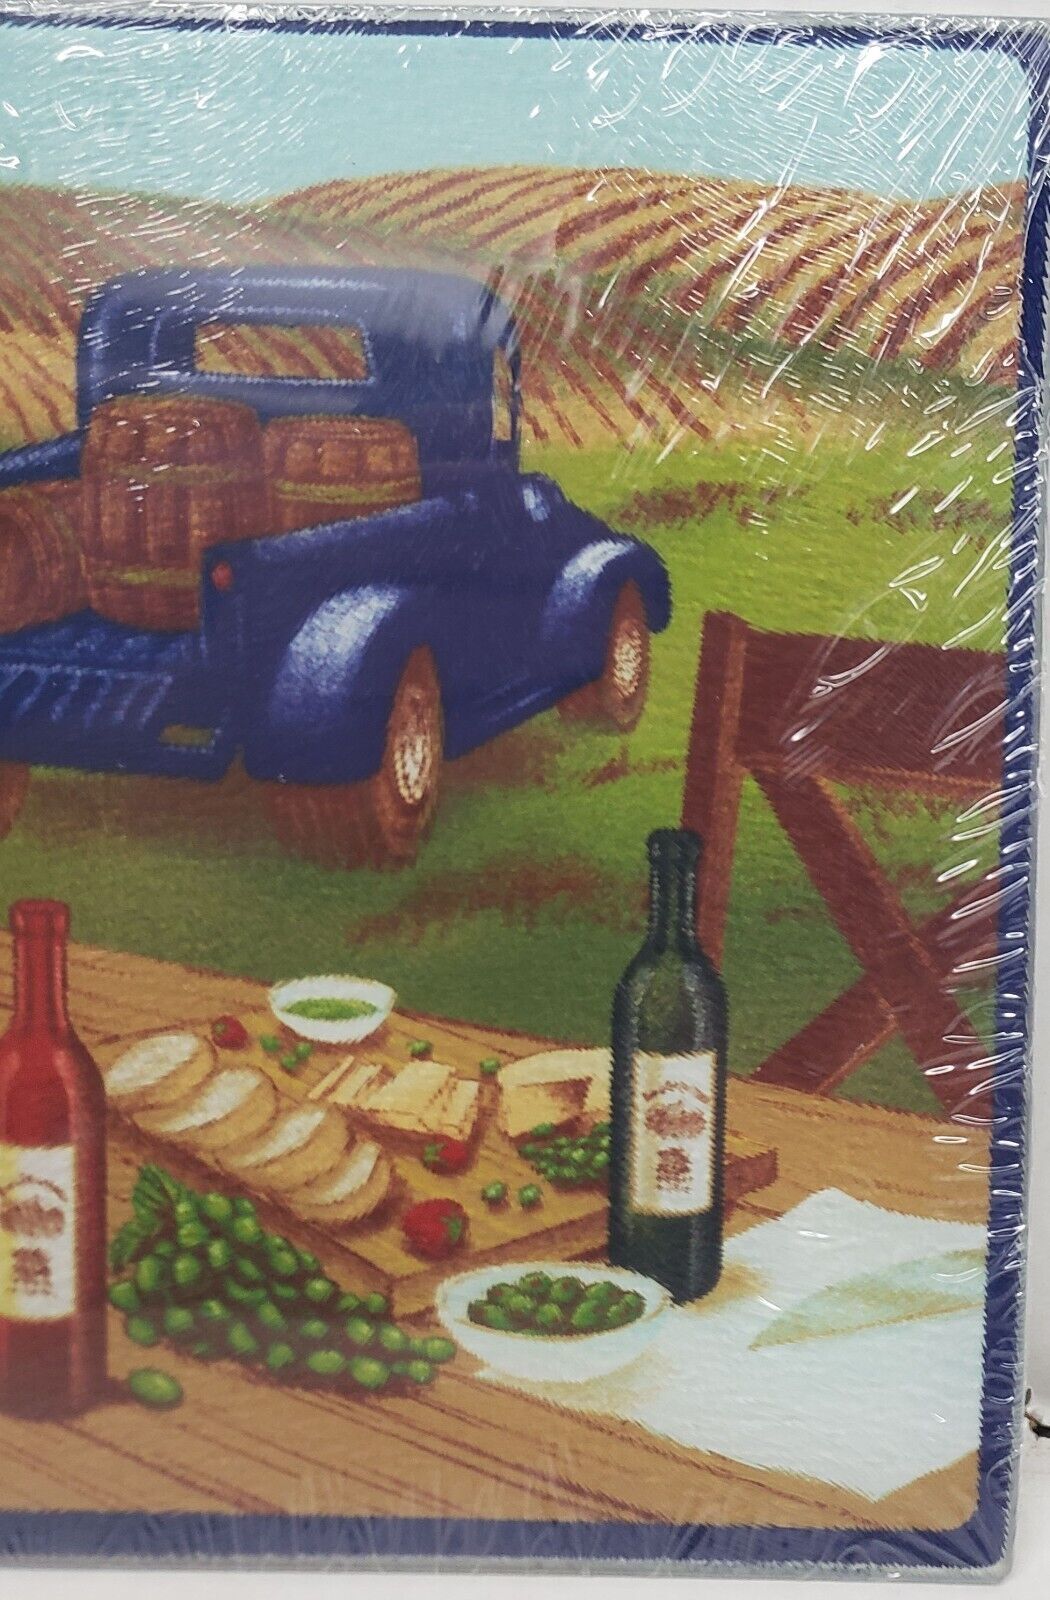 Primary image for Square Glass Cutting Board/Trivet, app. 8" WINE & GRAPES,BLUE TRUCK W/BARRELS,GR